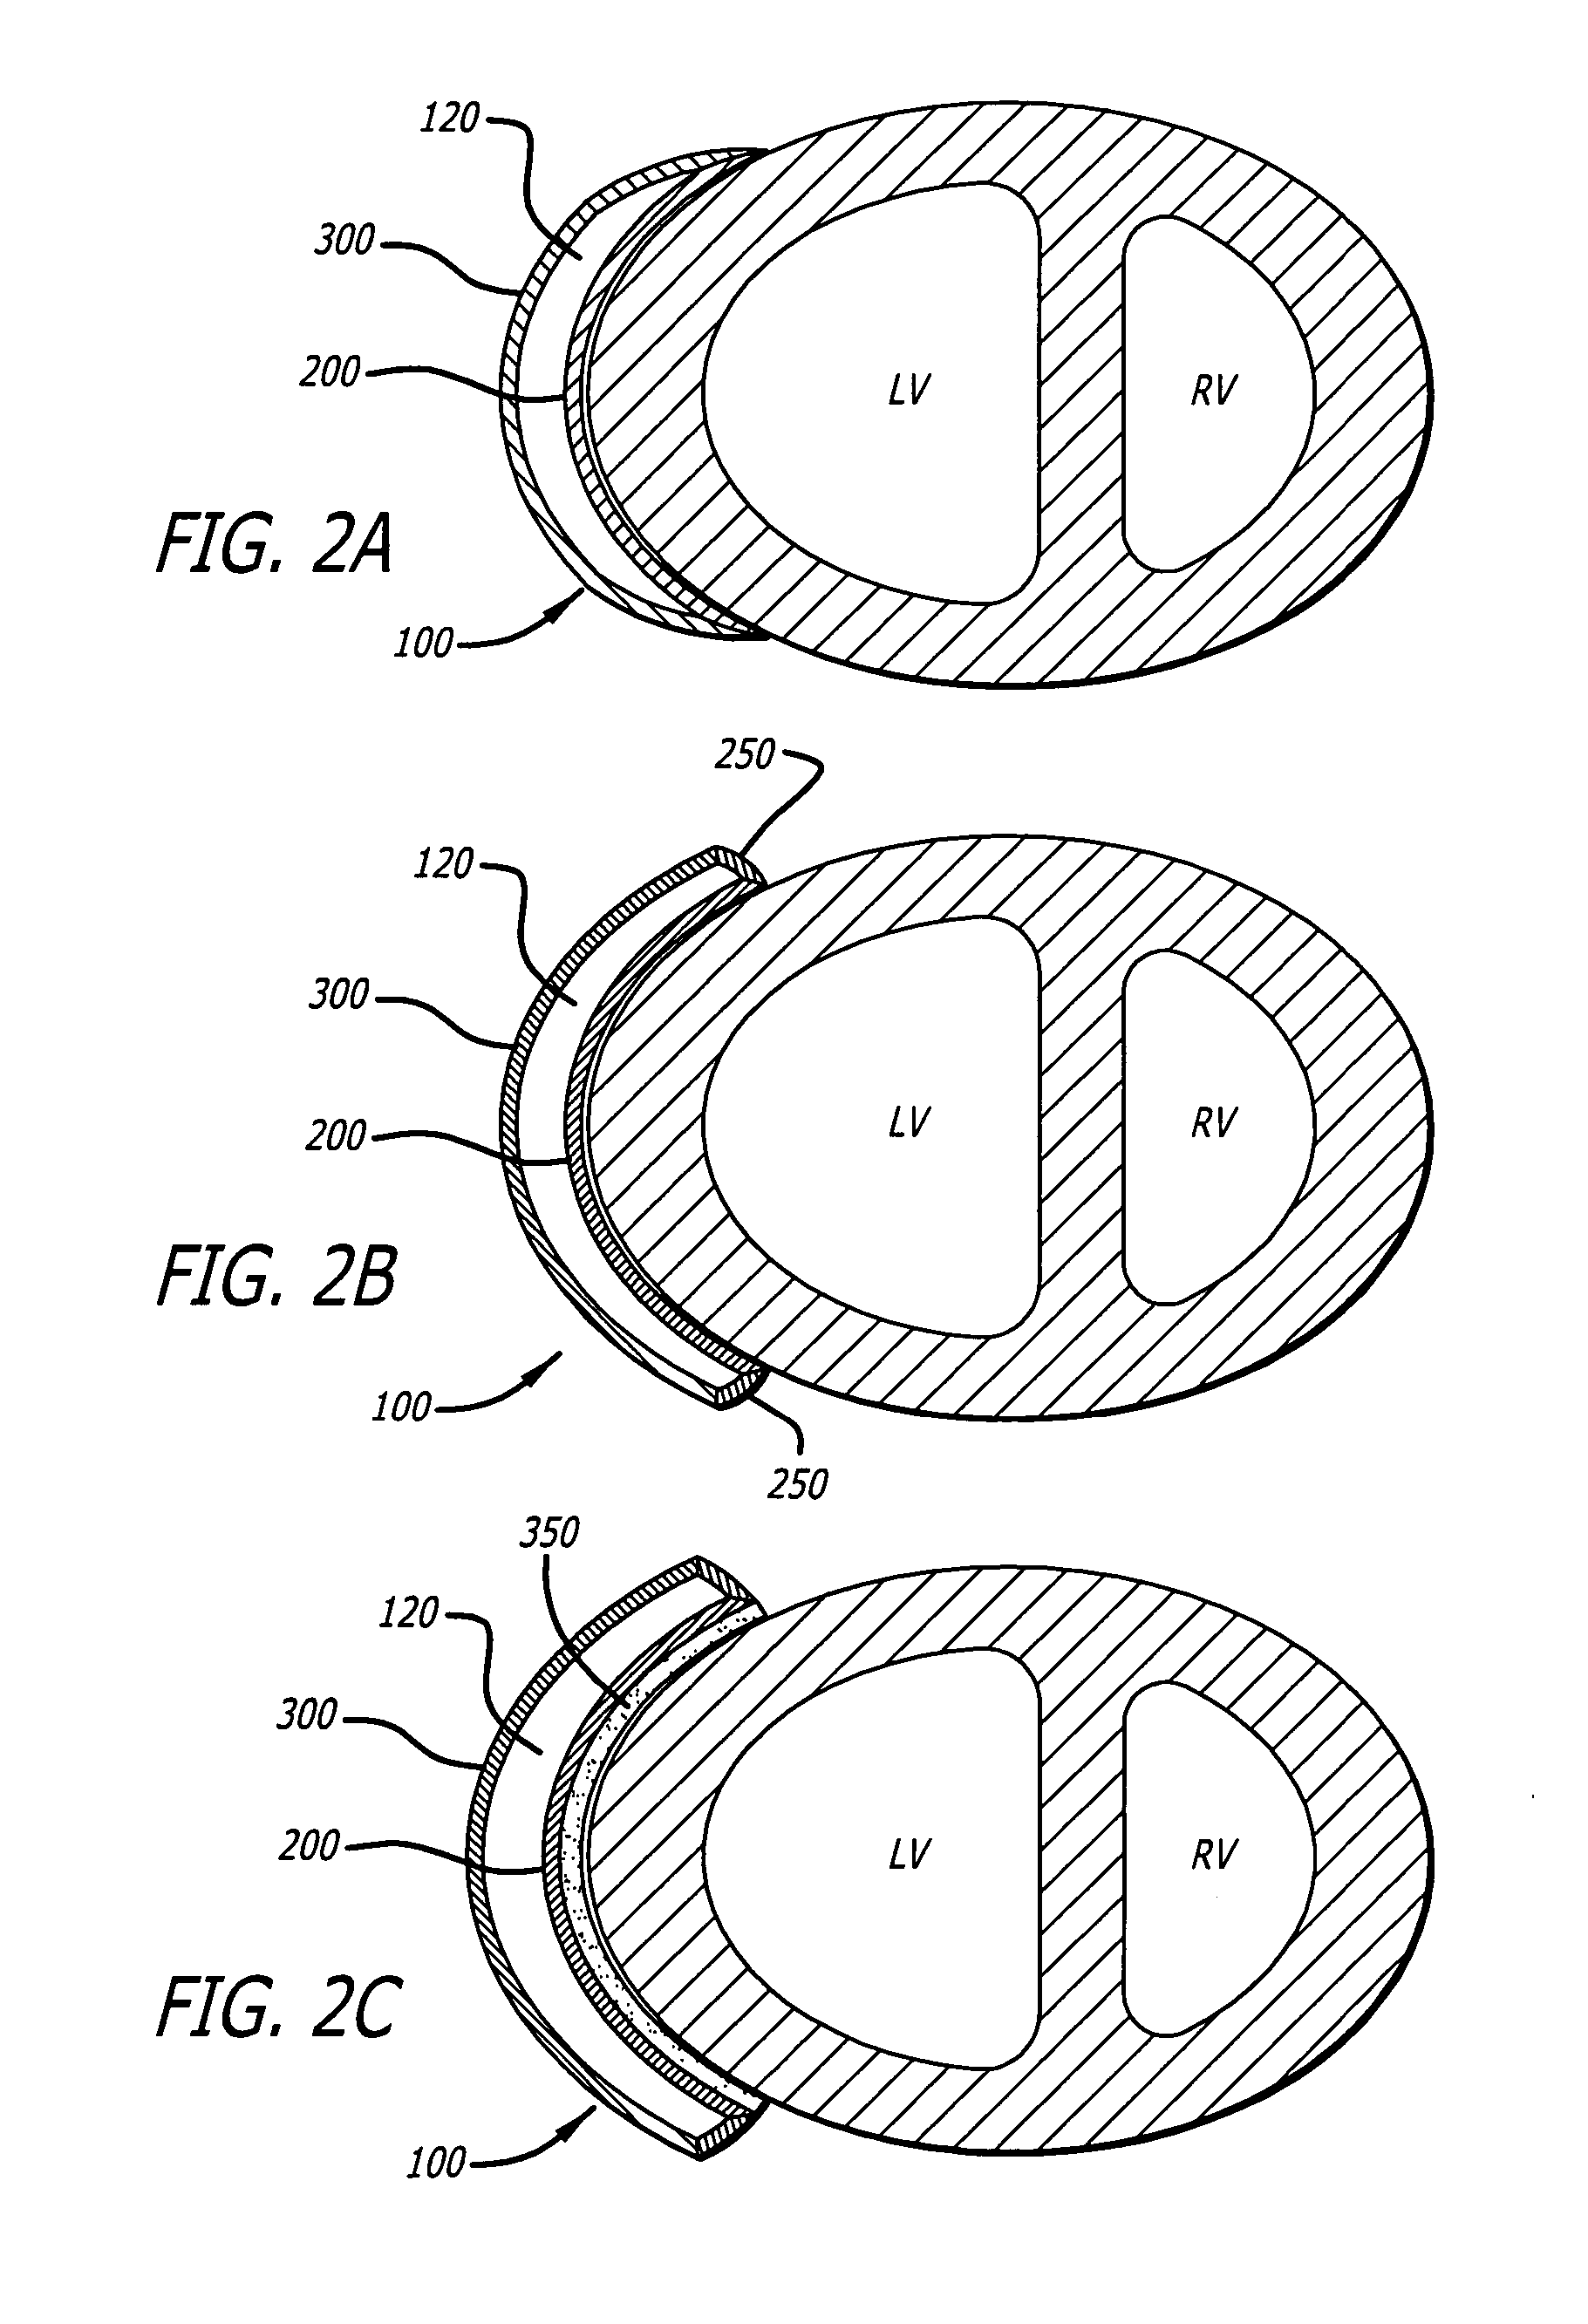 Inflatable cardiac device for treating and preventing ventricular remodeling